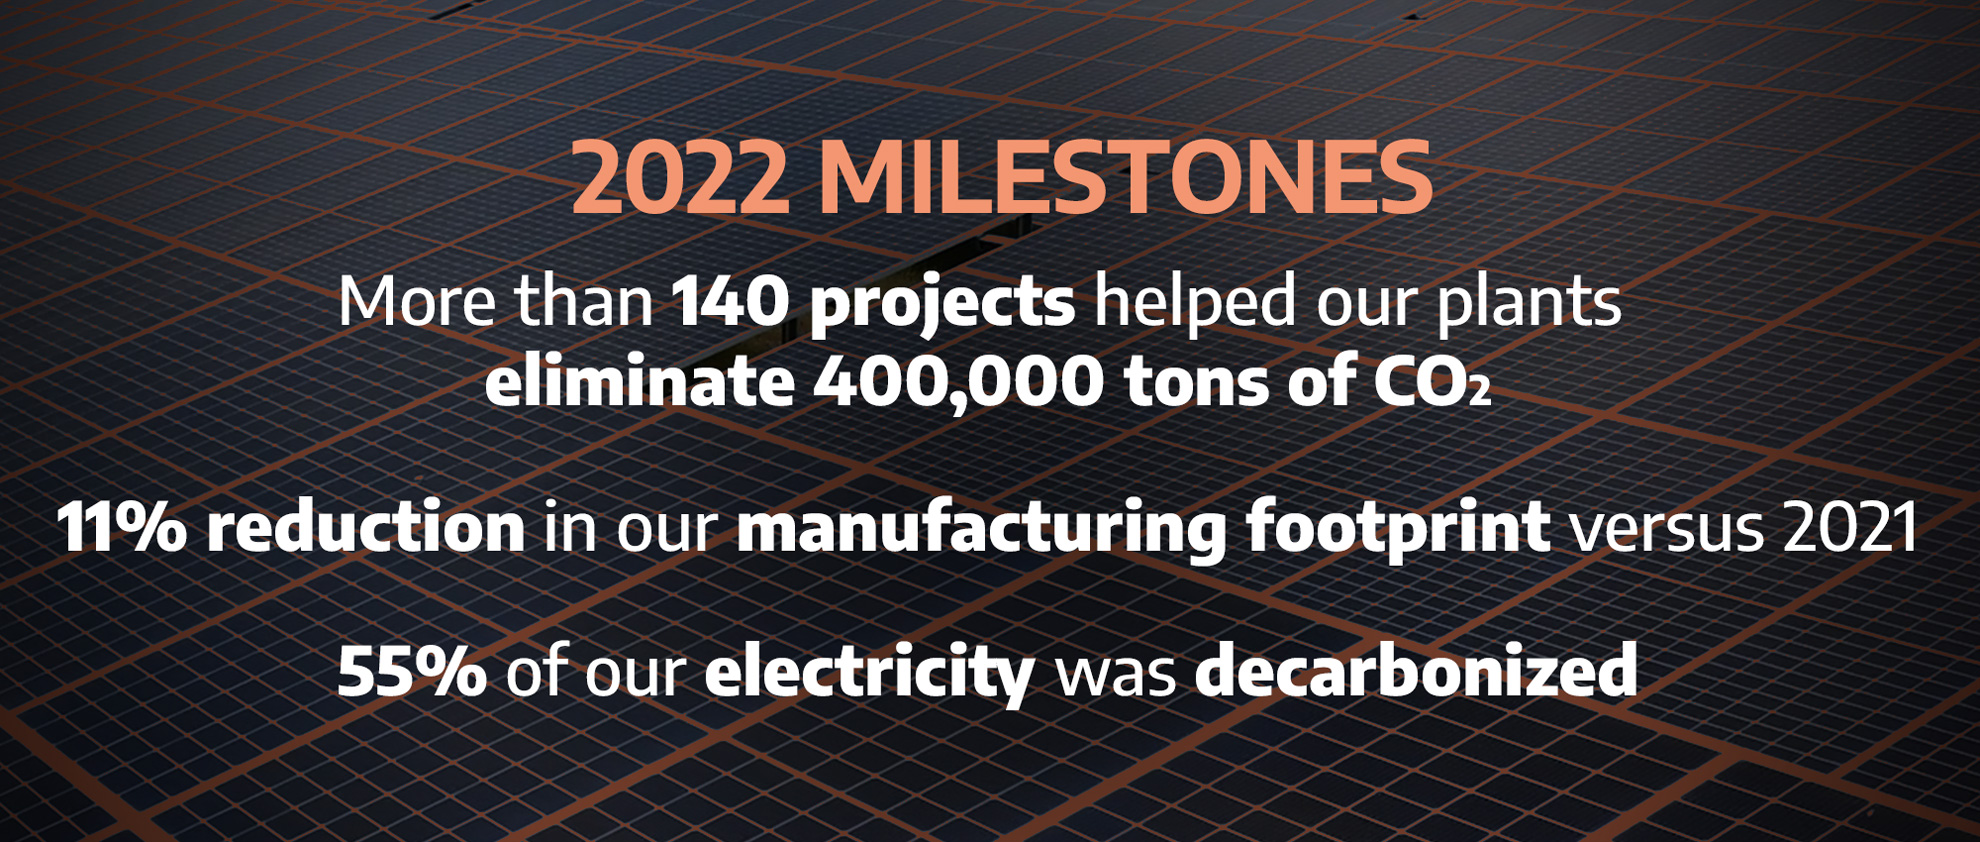 2022 MILESTONES. More than 140 projects helped our plants eliminate 400,000 tons of CO2. 11% reduction in our manufacturing footprint versus 2021. 55% of our electricity was decarbonized.